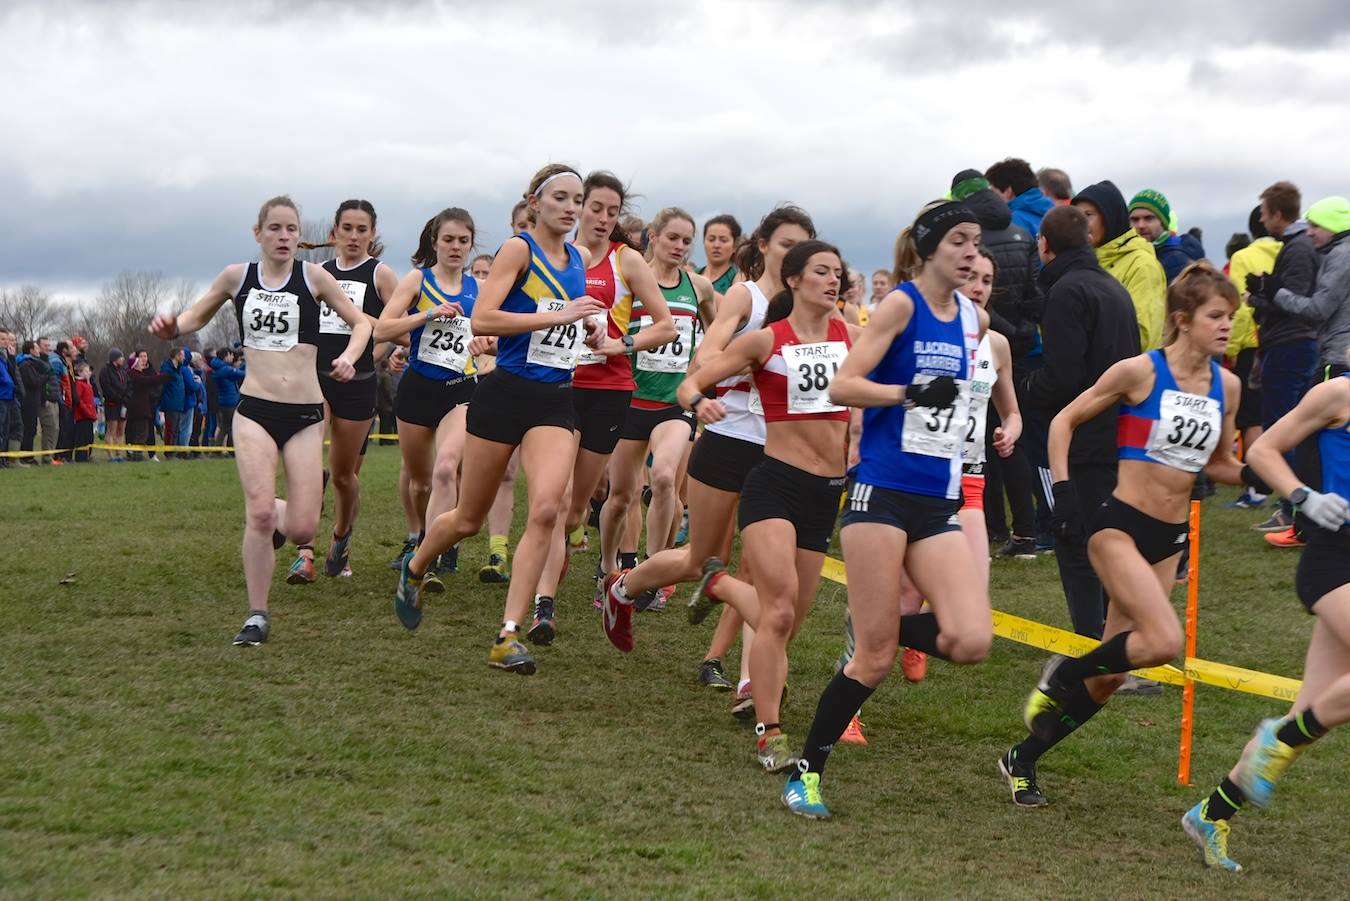 Northern XC Championships 2020 - **UPDATED INFO 24-01-2020**